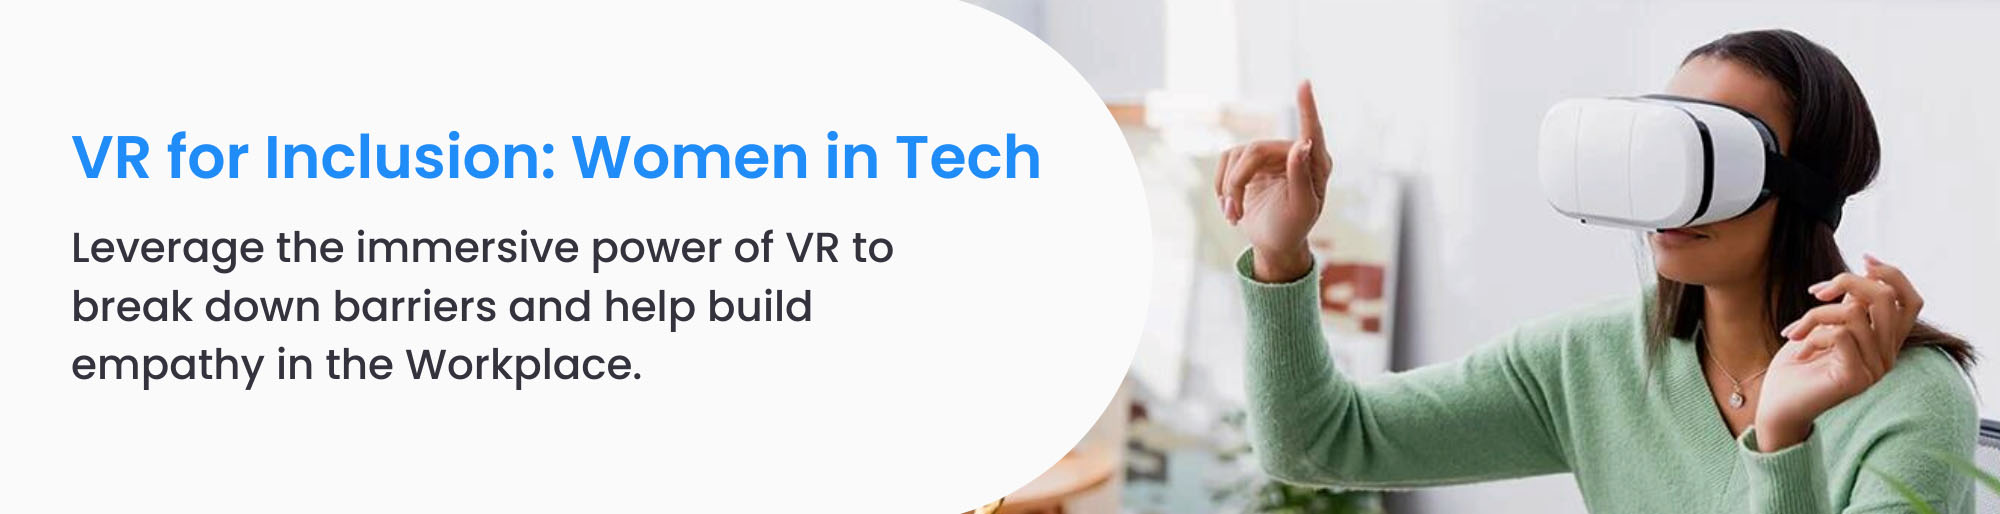 VR for InclusionWomen in Tech, virtual reality training within workplace from meta